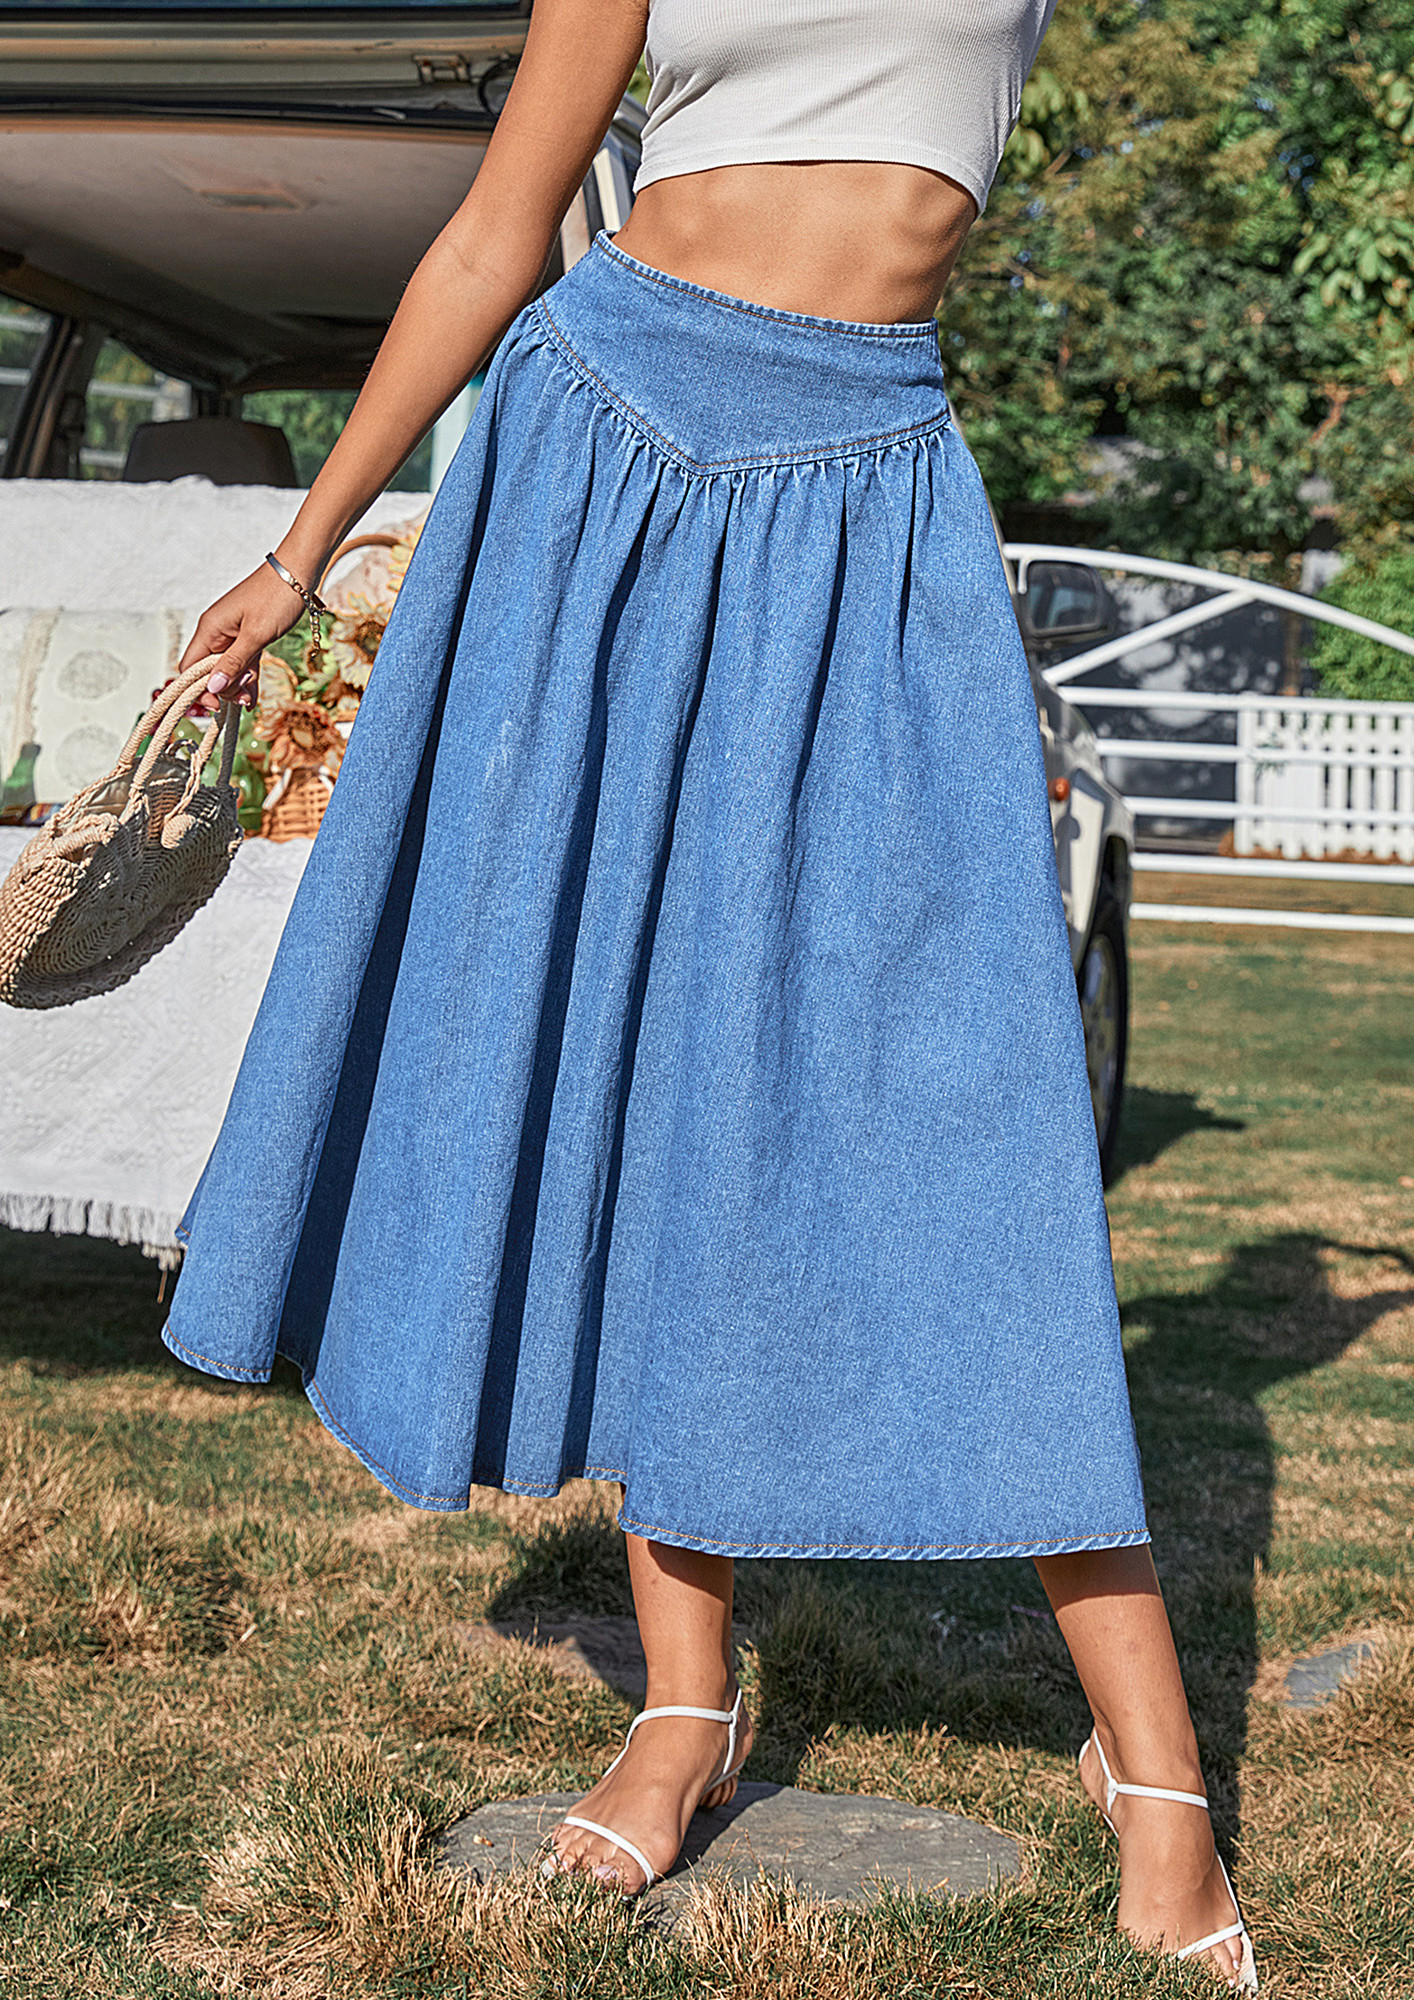 Denim Skirt Outfits You'll Love This Fall & Winter - #AEJeans